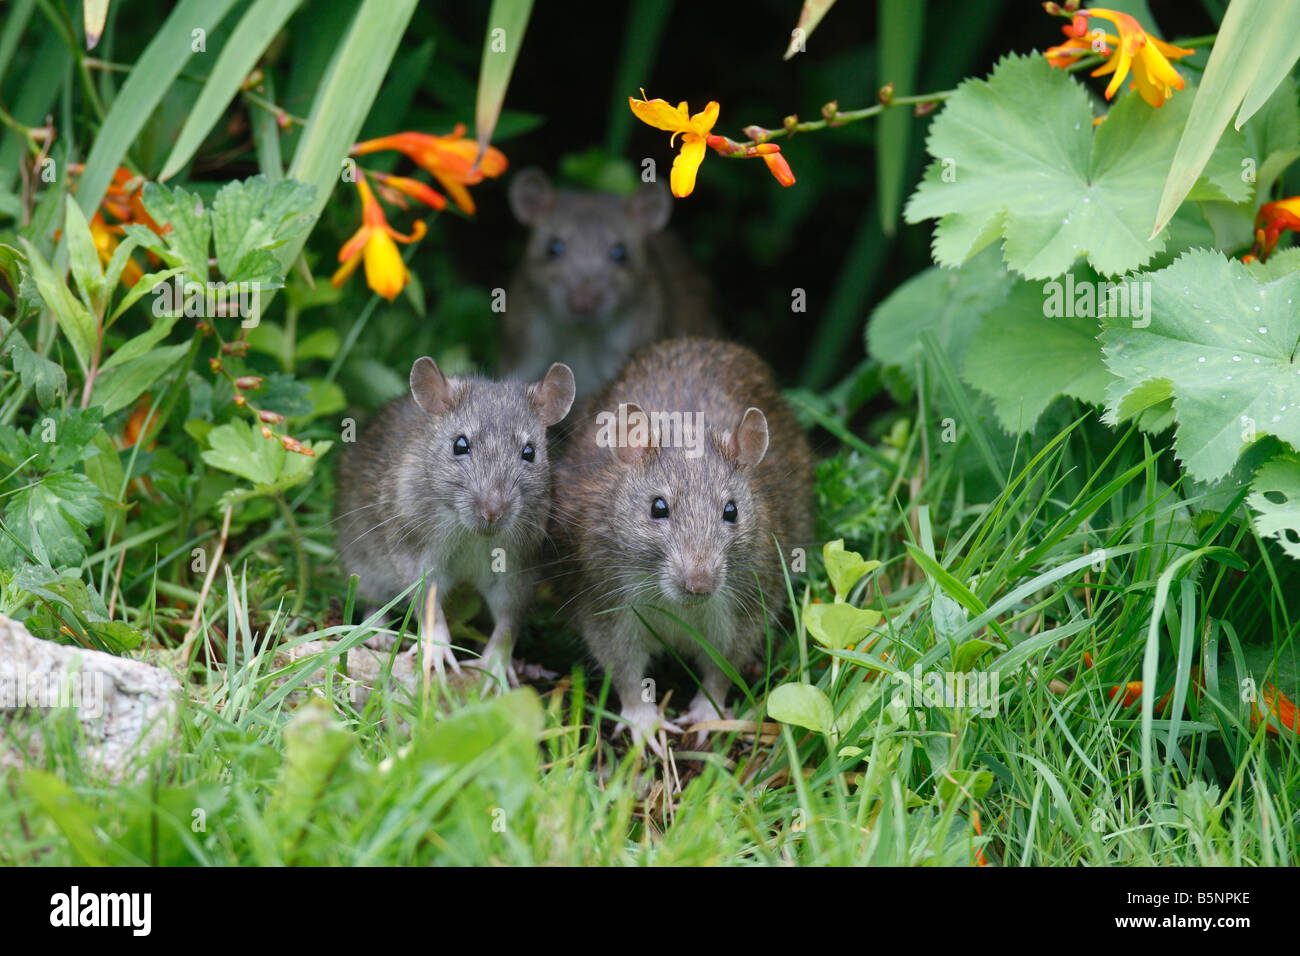 BROWN RAT Rattus norvegicus COMING OUT OF FLOWER BORDER FRONT VIEW Stock Photo